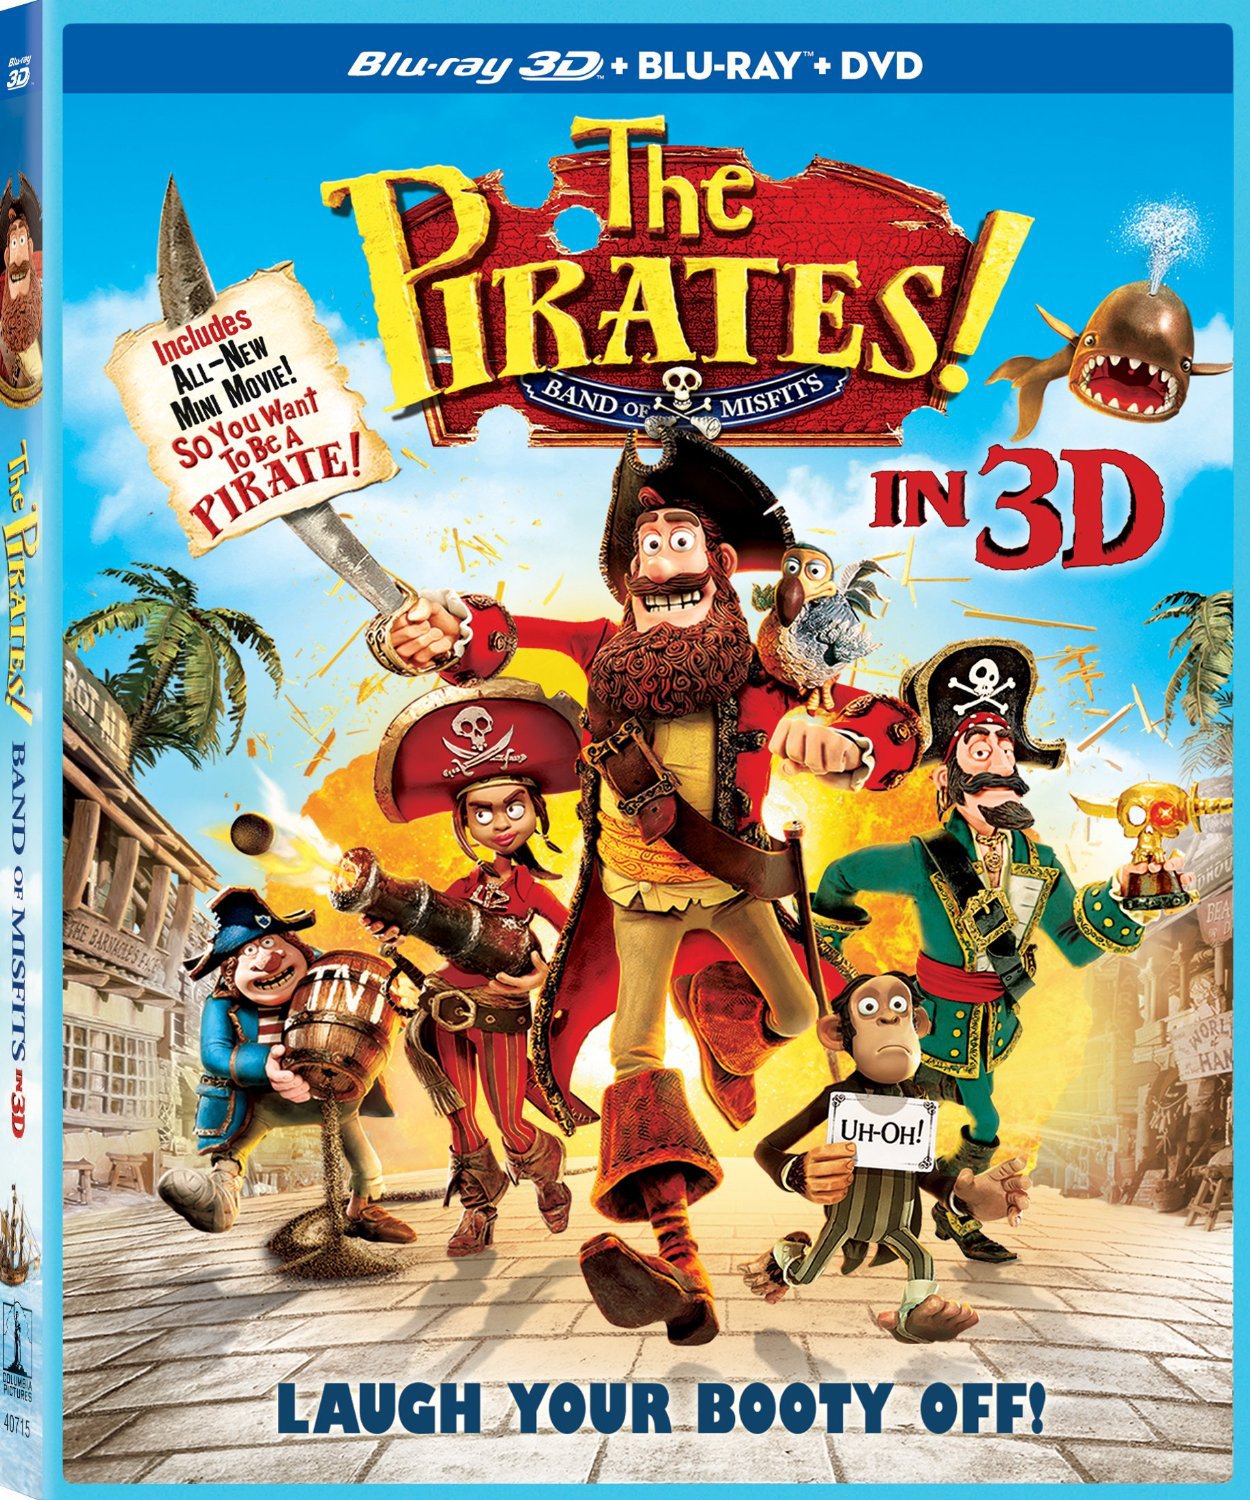 Pirates! Band of Misfits in 3D